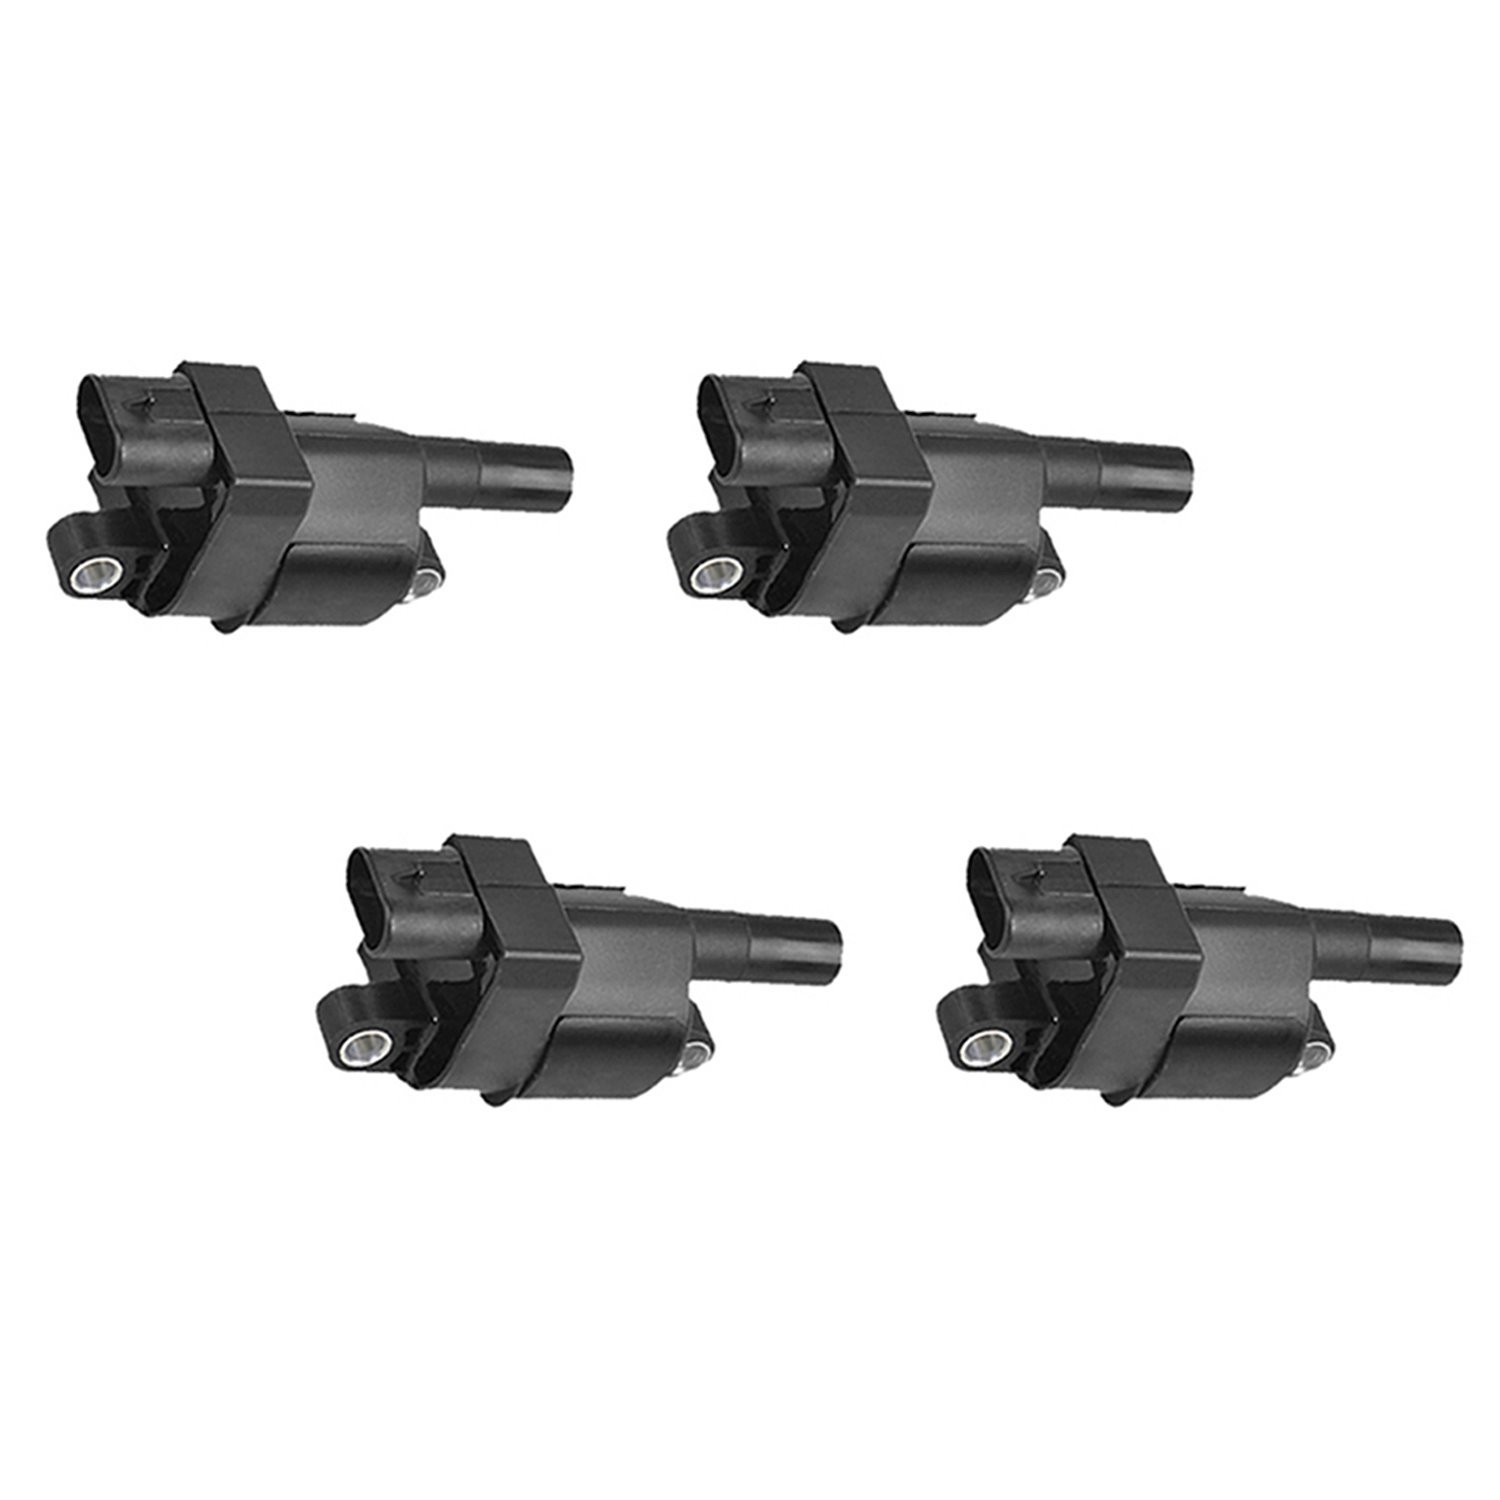 OE Replacement Ignition Coils for GM 6.0L/5.3L